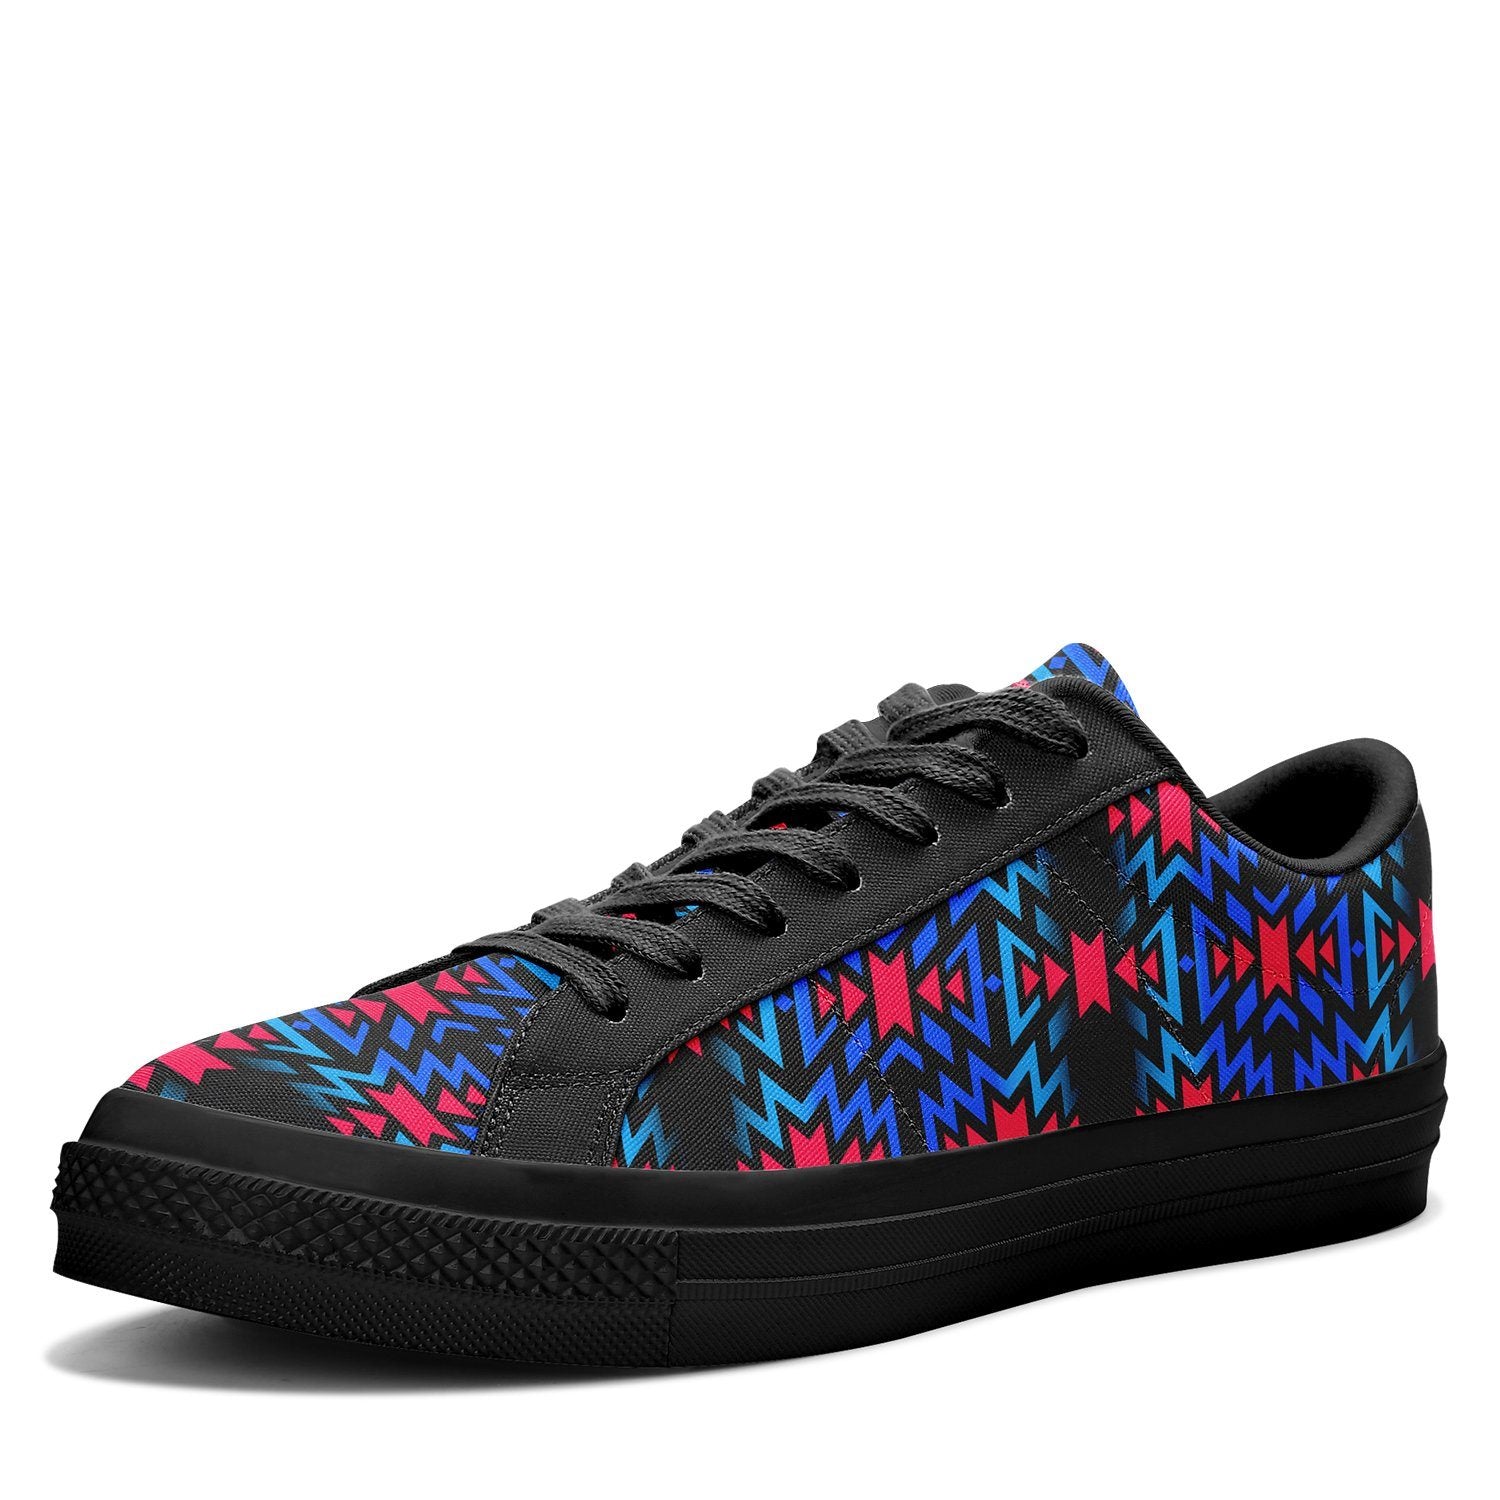 Black Fire Dragonfly Aapisi Low Top Canvas Shoes Black Sole 49 Dzine 